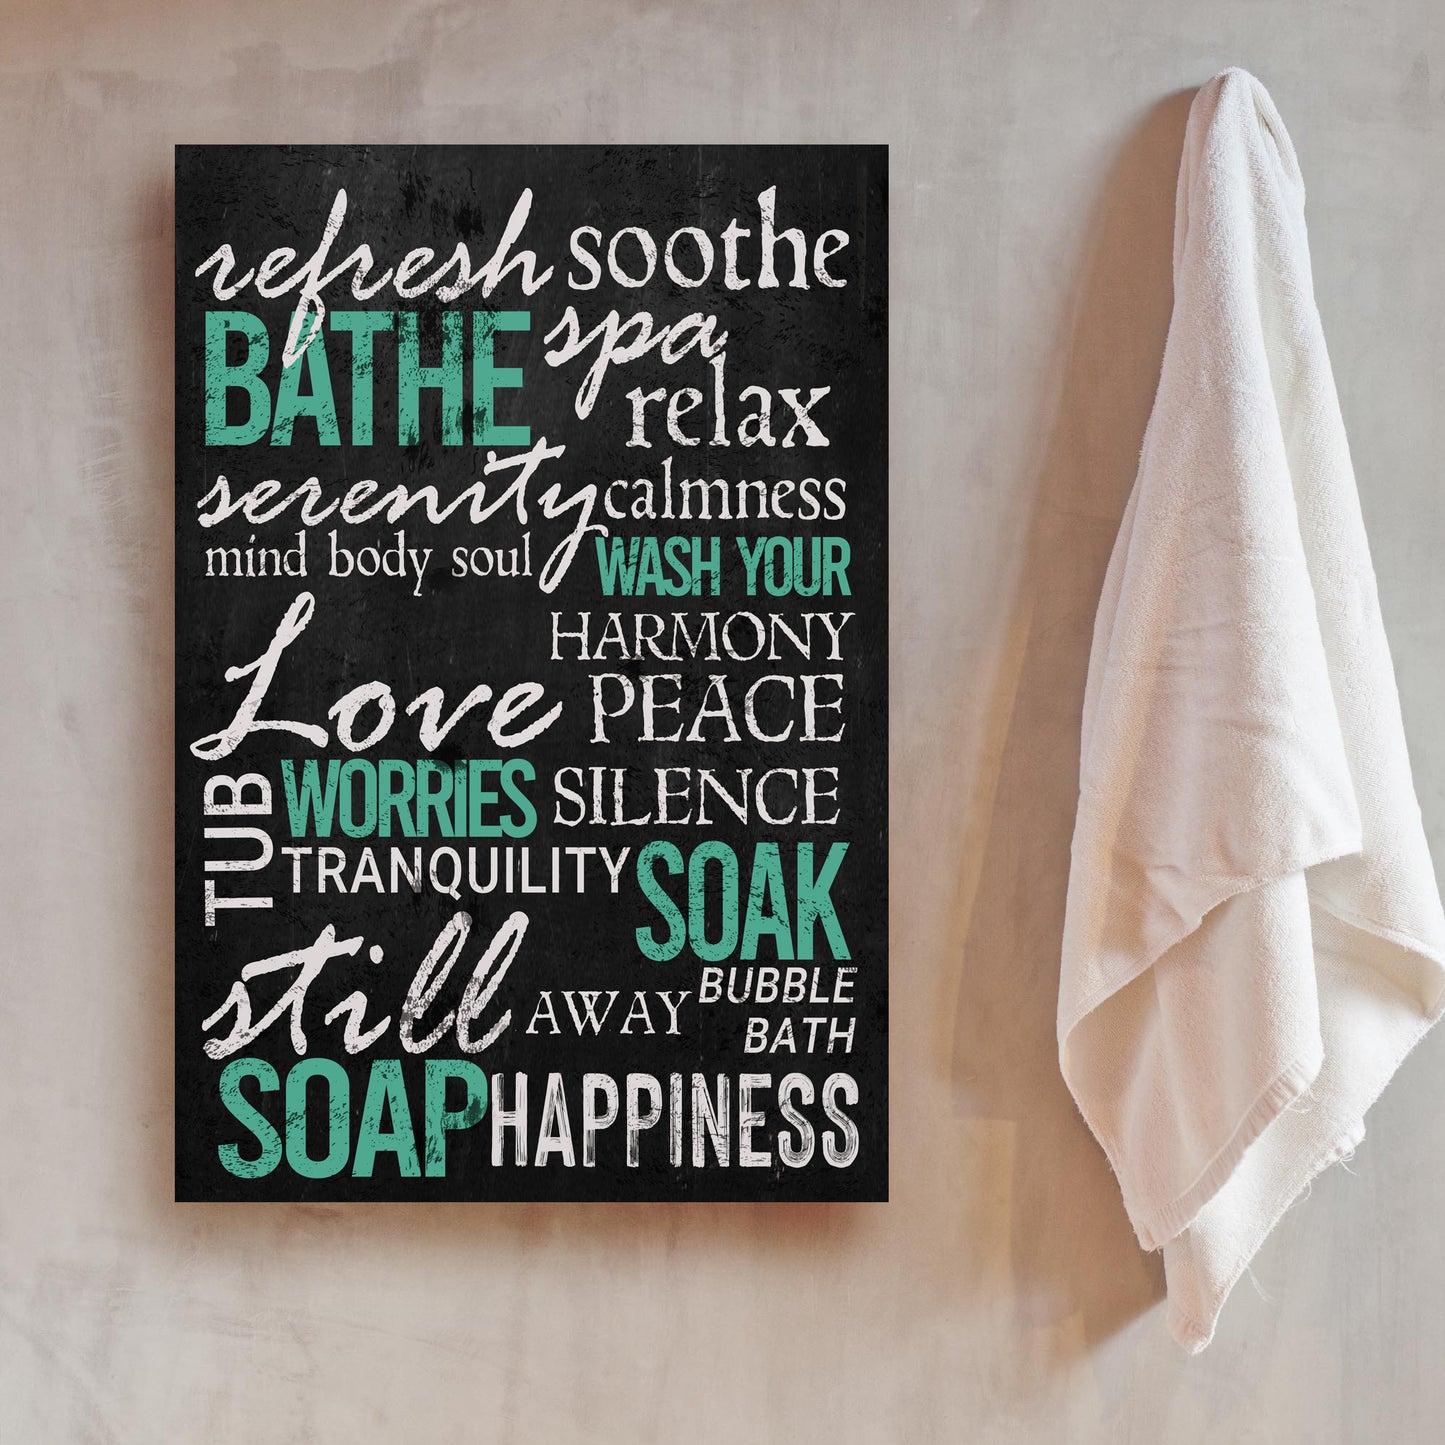 Refresh Soothe Bathe Bathroom Sign - Image by Tailored Canvases